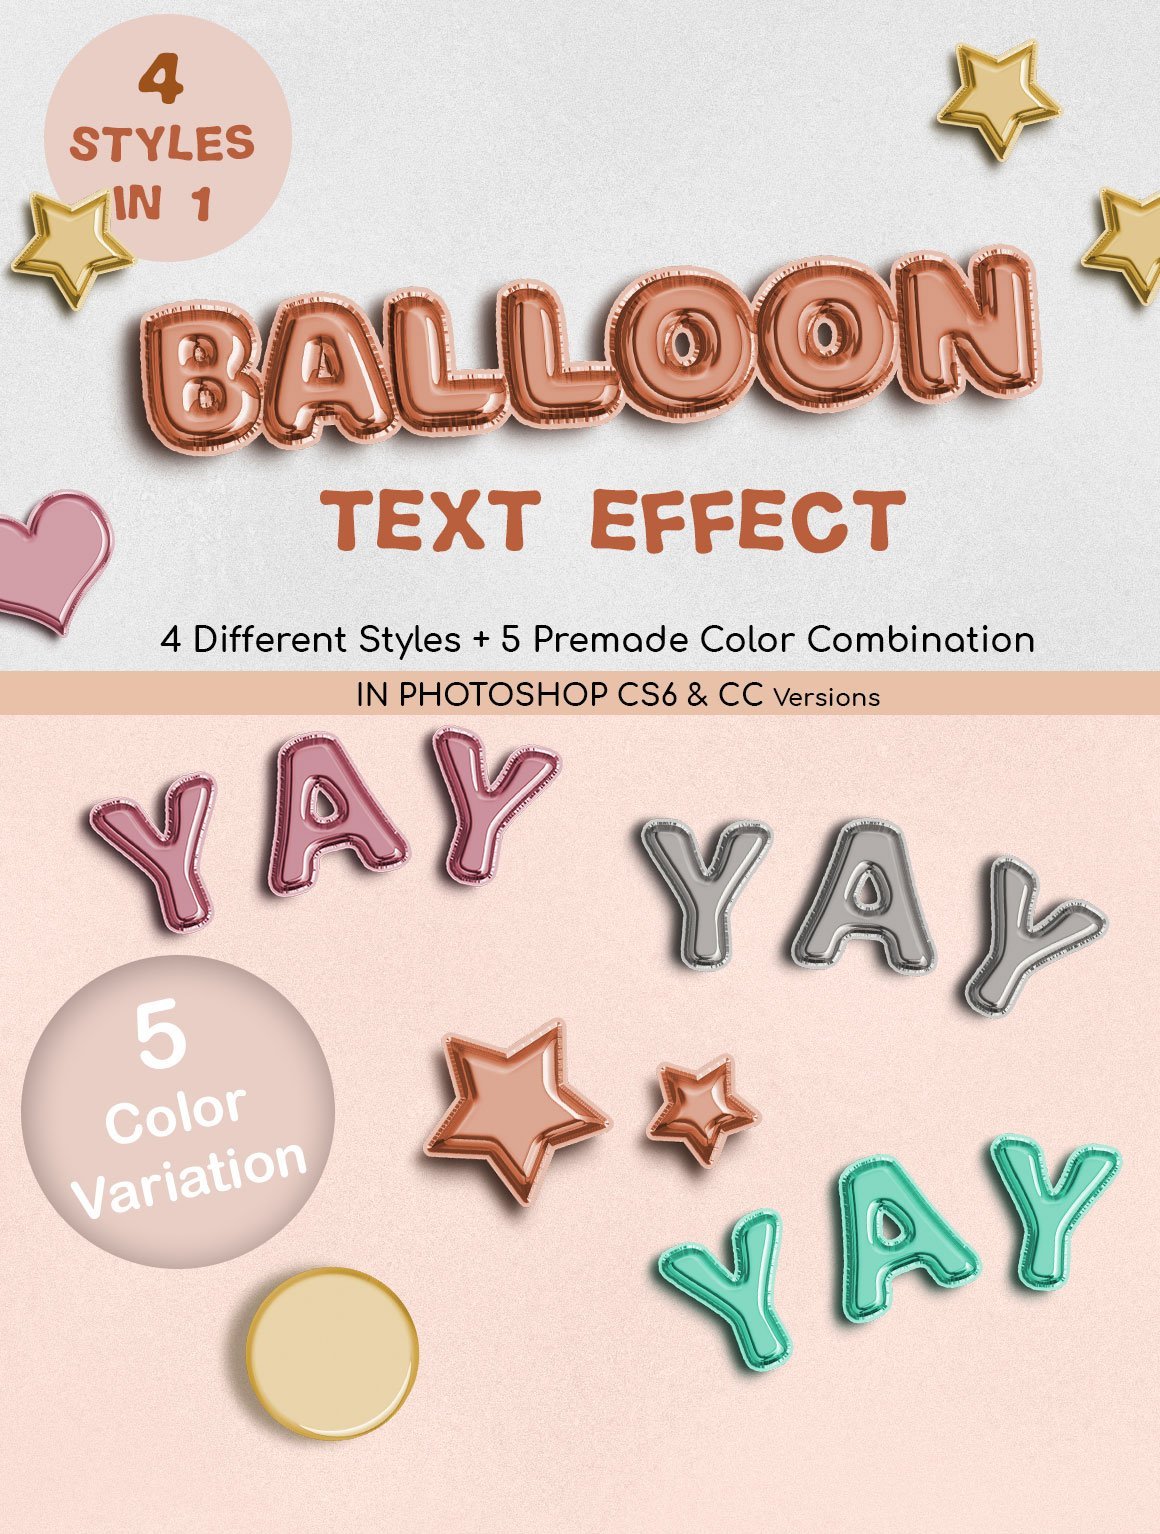 Balloon Foil Text Effect PScover image.